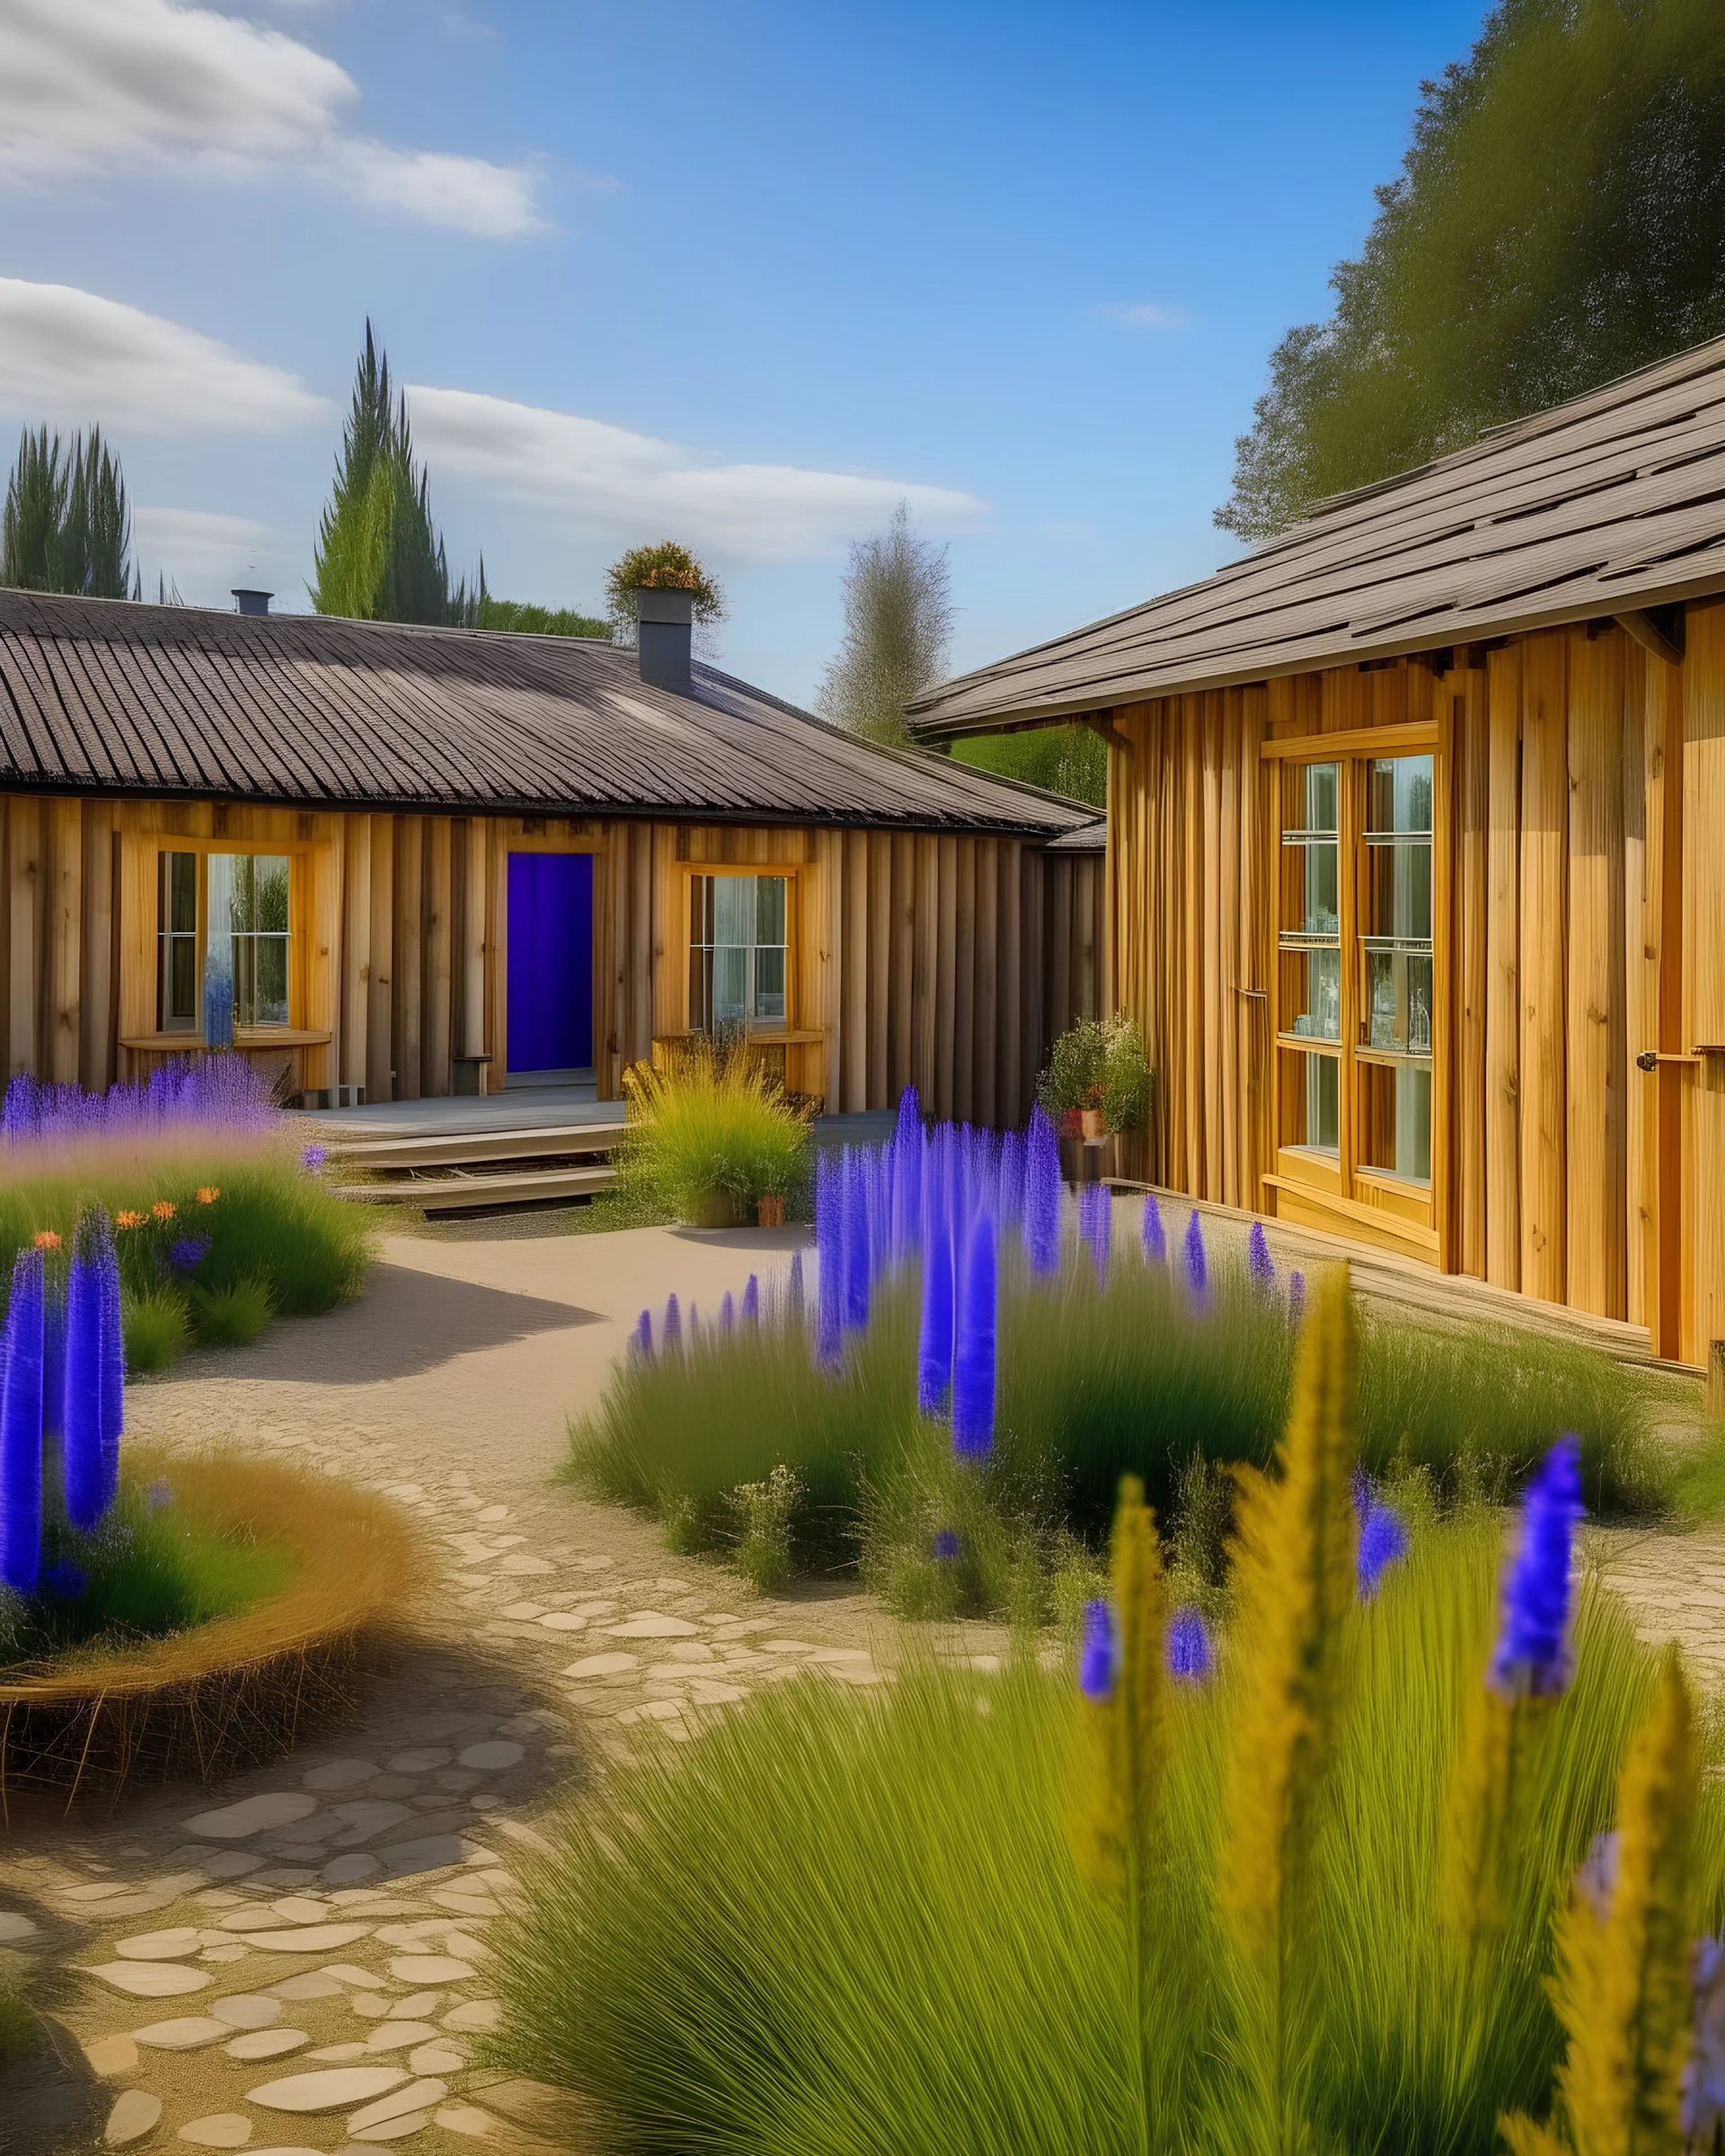 A rejuvenating herbal spa retreat nestled in the heart of nature, featuring rustic wooden cabins surrounded by fields of lavender and fields of chamomile, offering blissful relaxation and holistic skincare treatments.